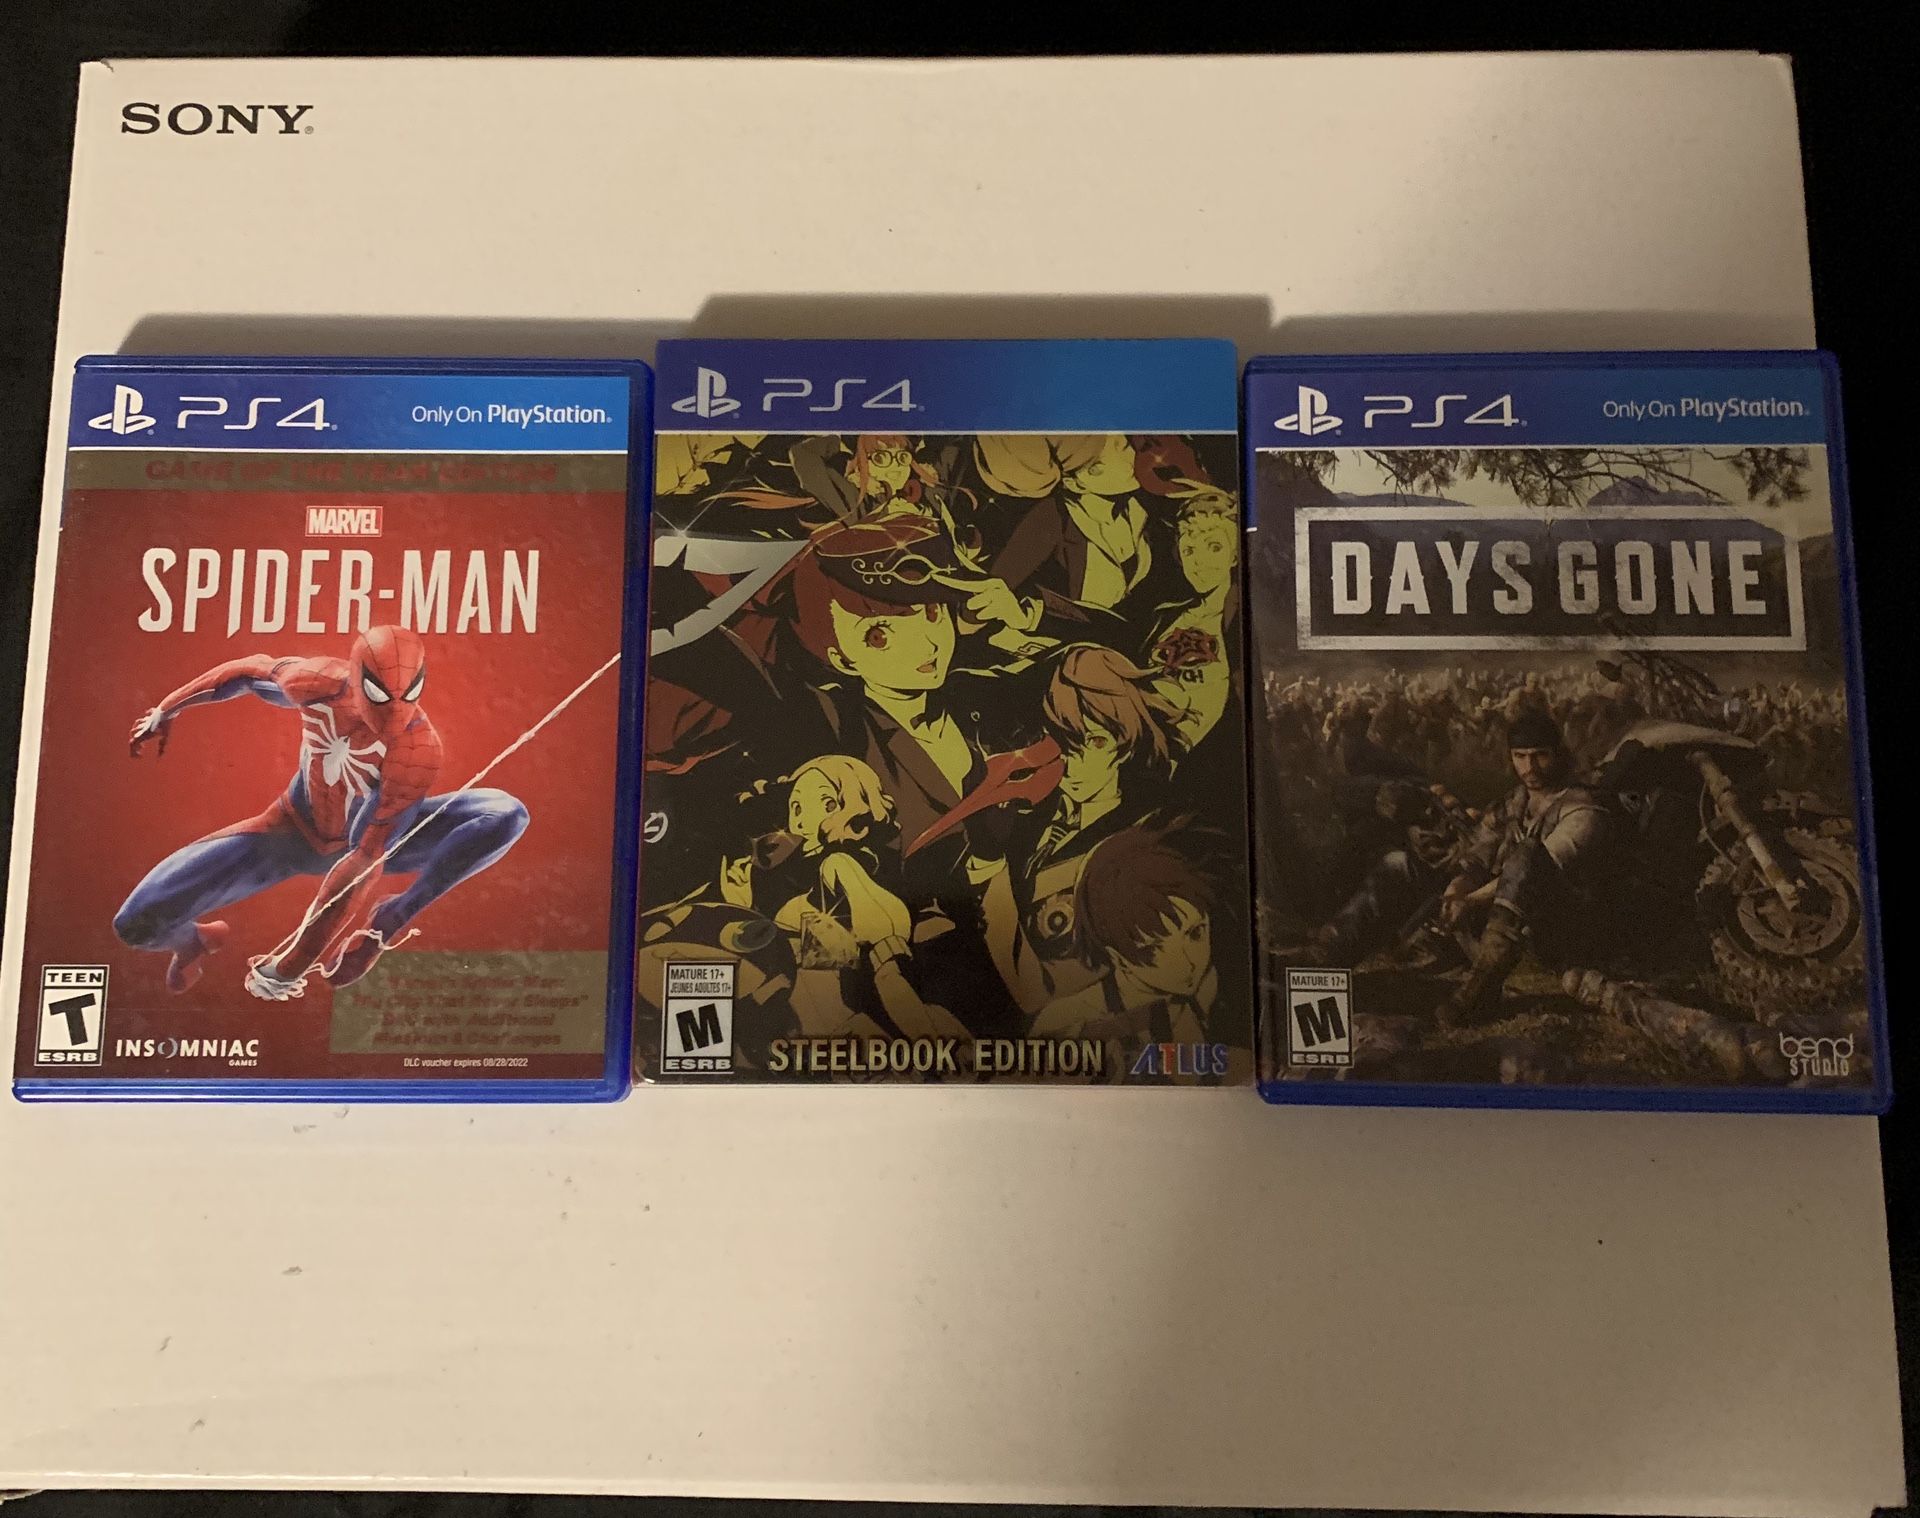 Persona 5 Royal, Days Gone and Spider man PS4